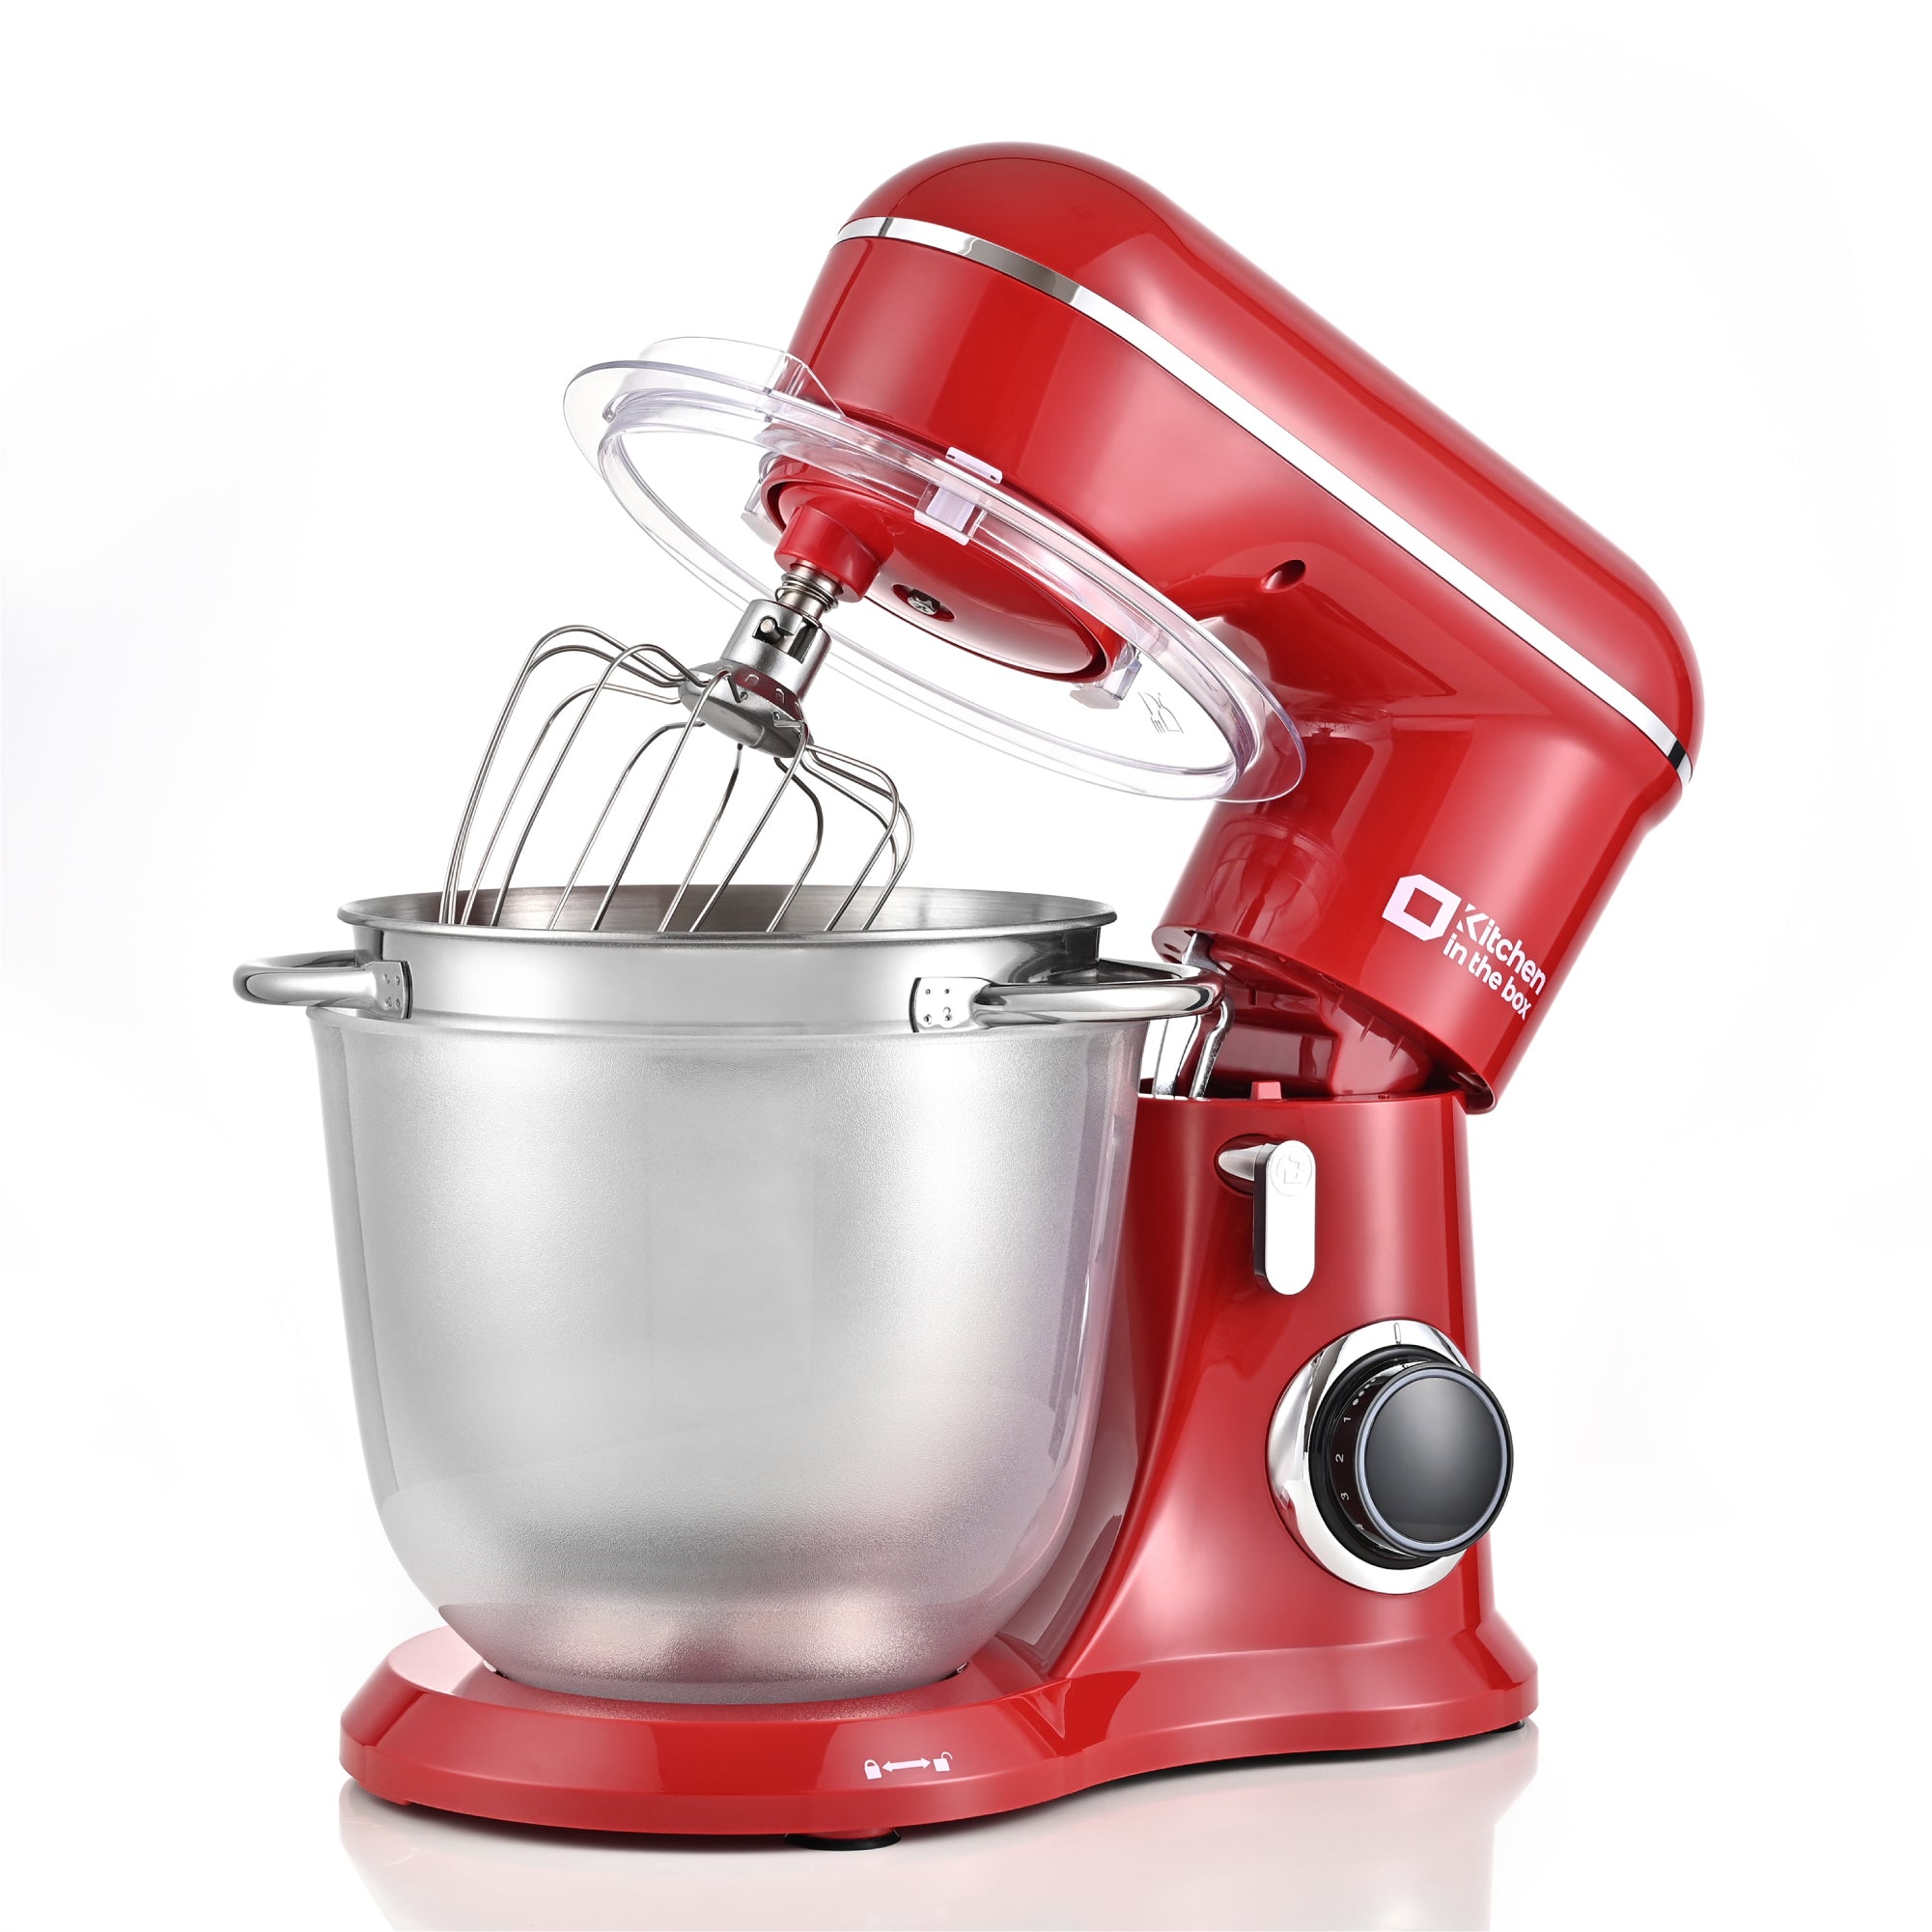 Every Major Kitchen Mixer Brand Ranked Worst To Best